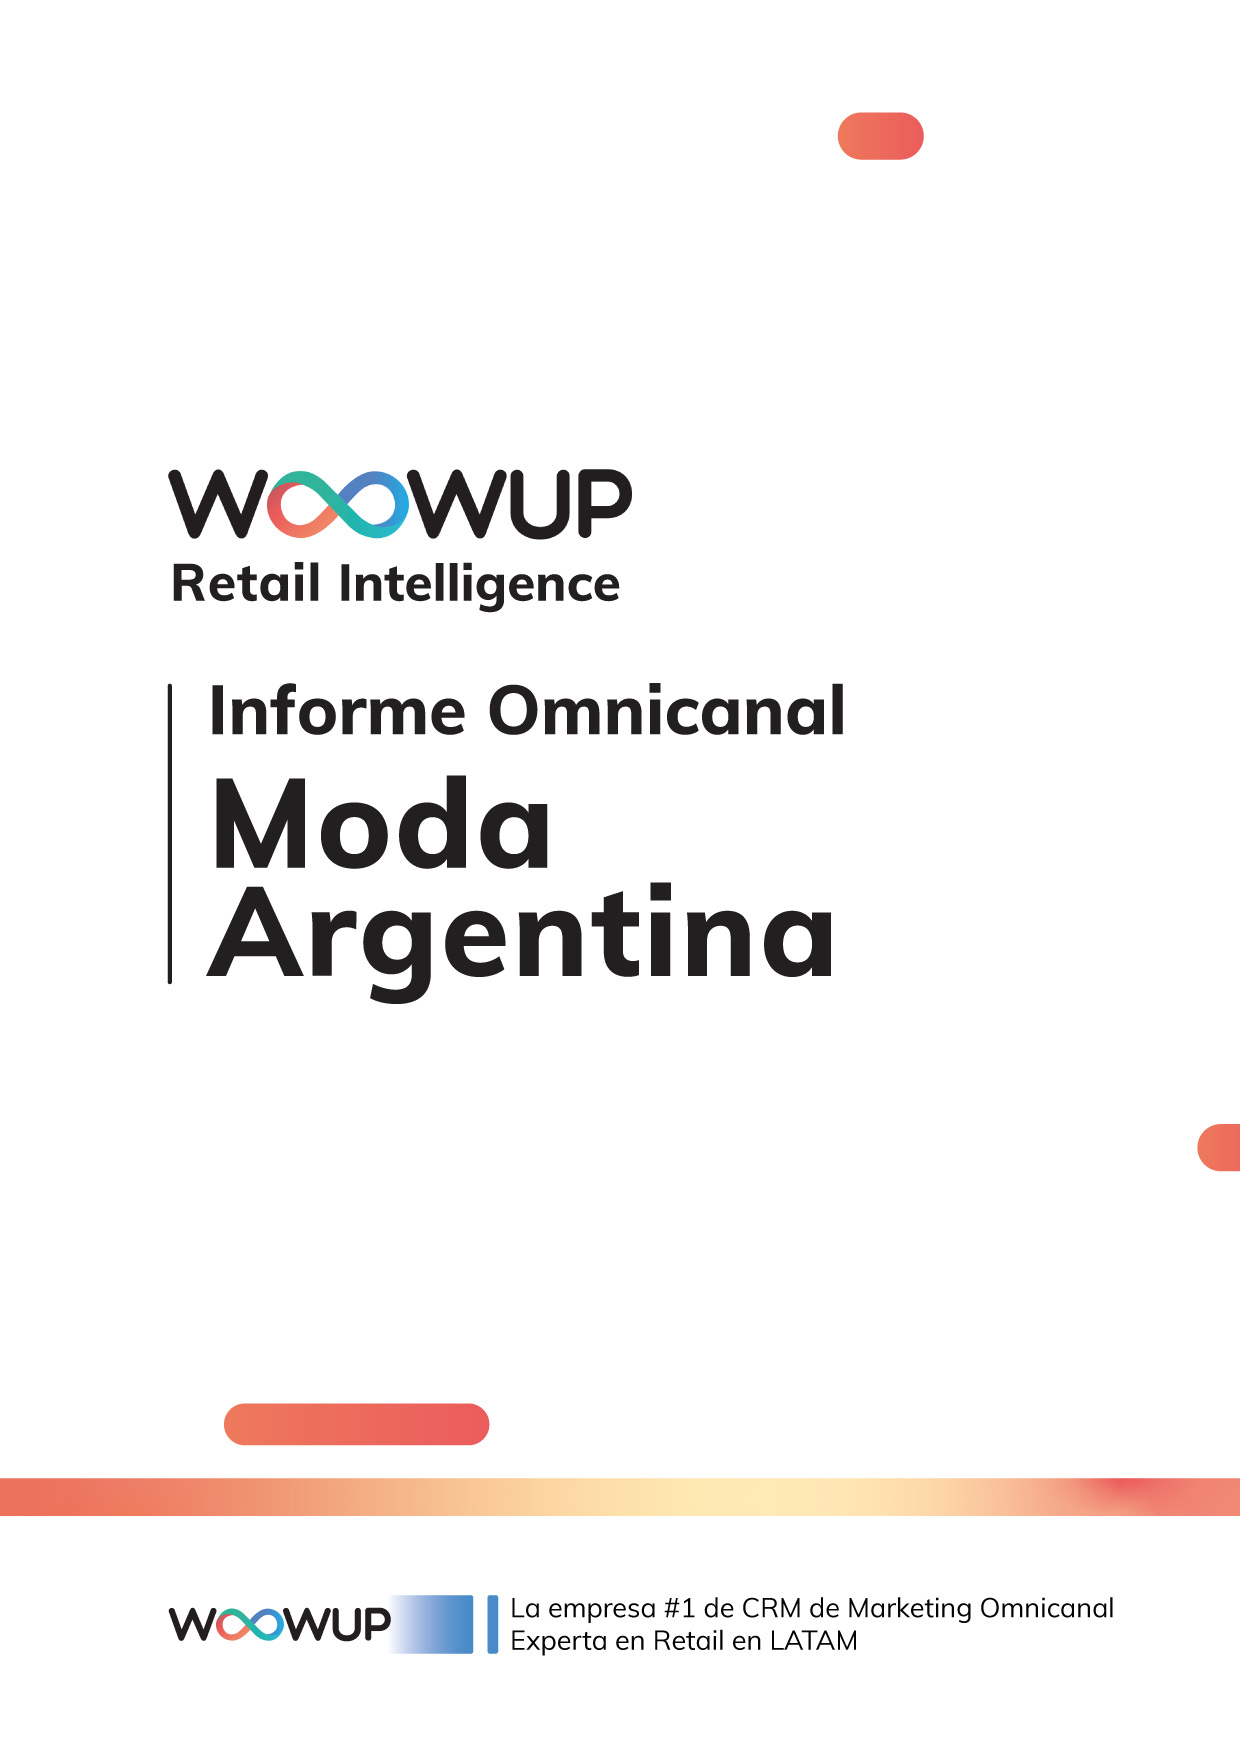 Informe omnicanal moda argentina WoowUp